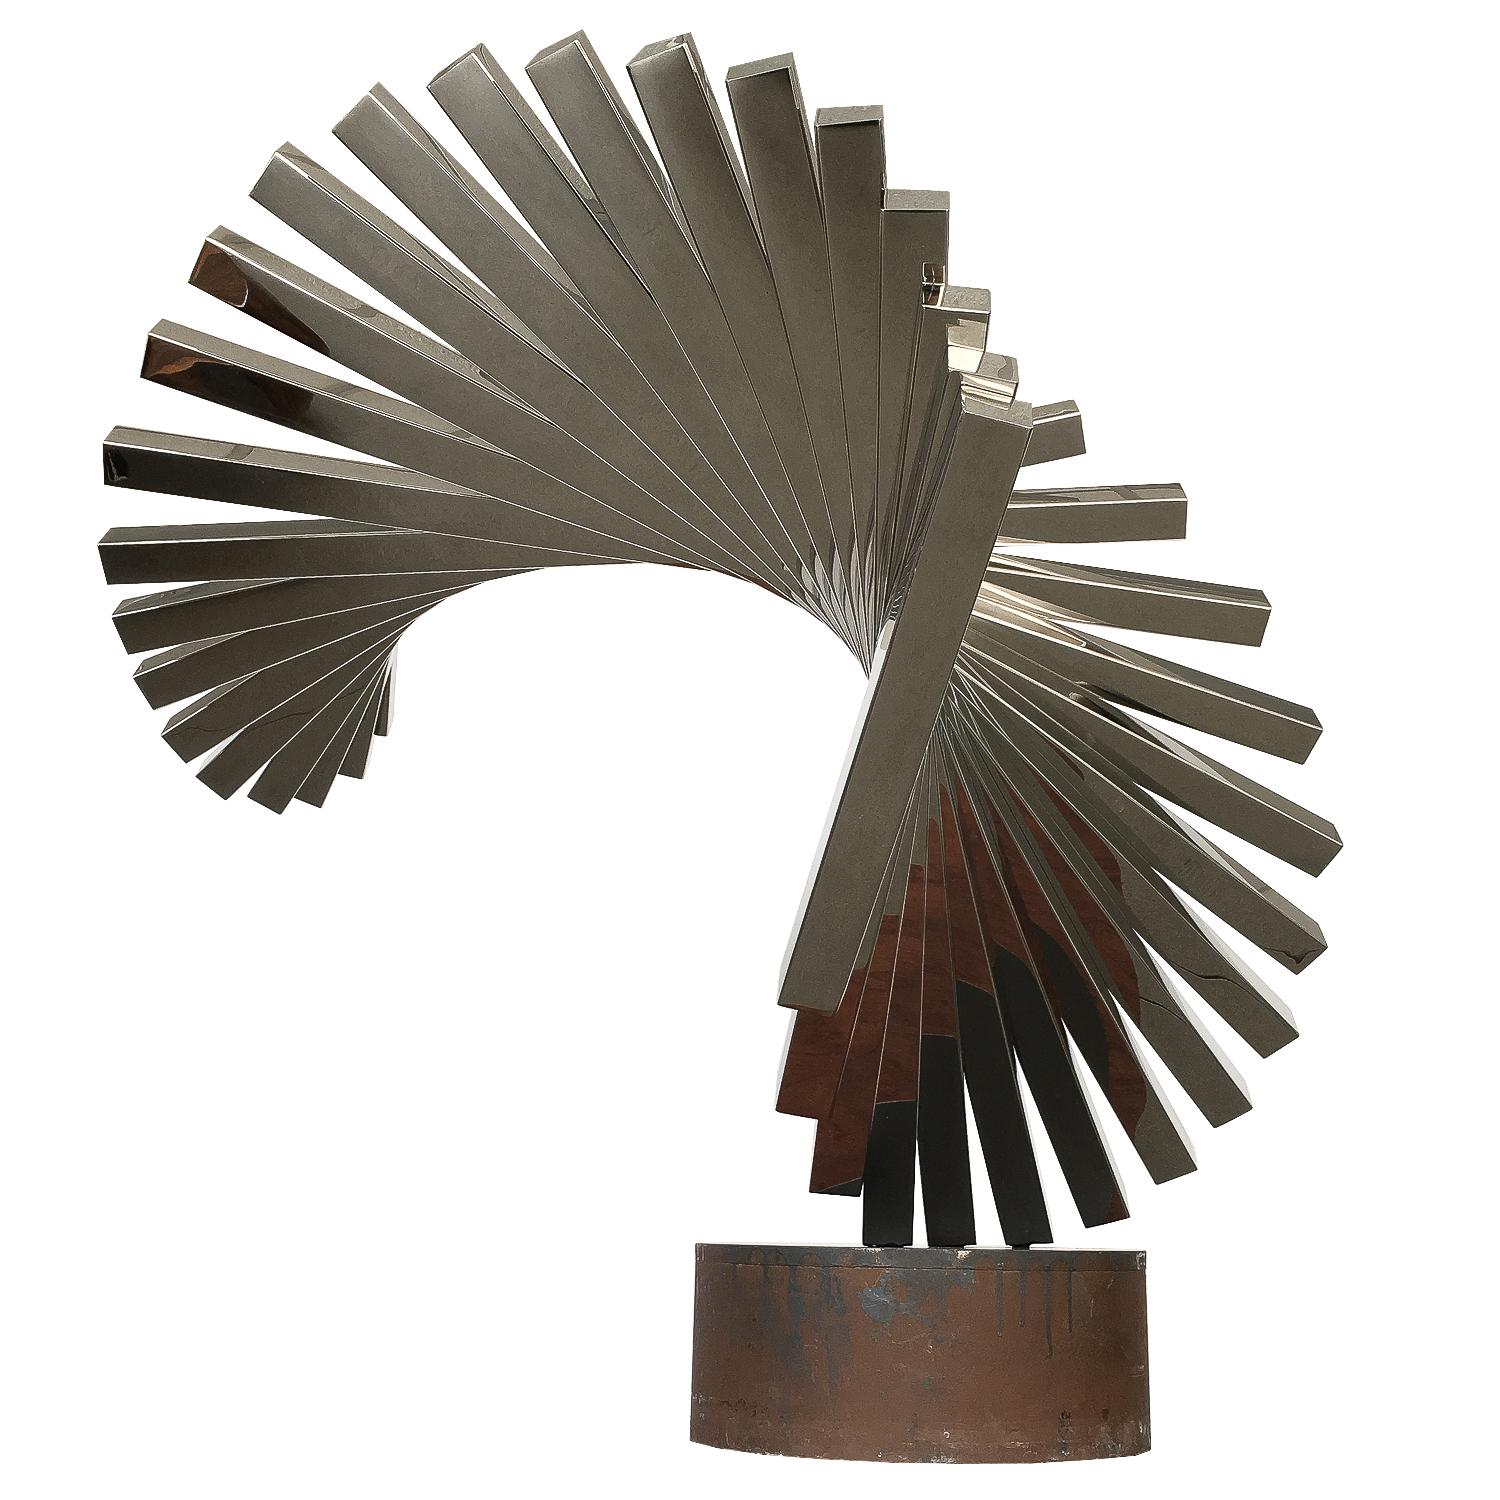 David Lee Brown Abstract Stainless Steel Sculpture for United Airlines 1